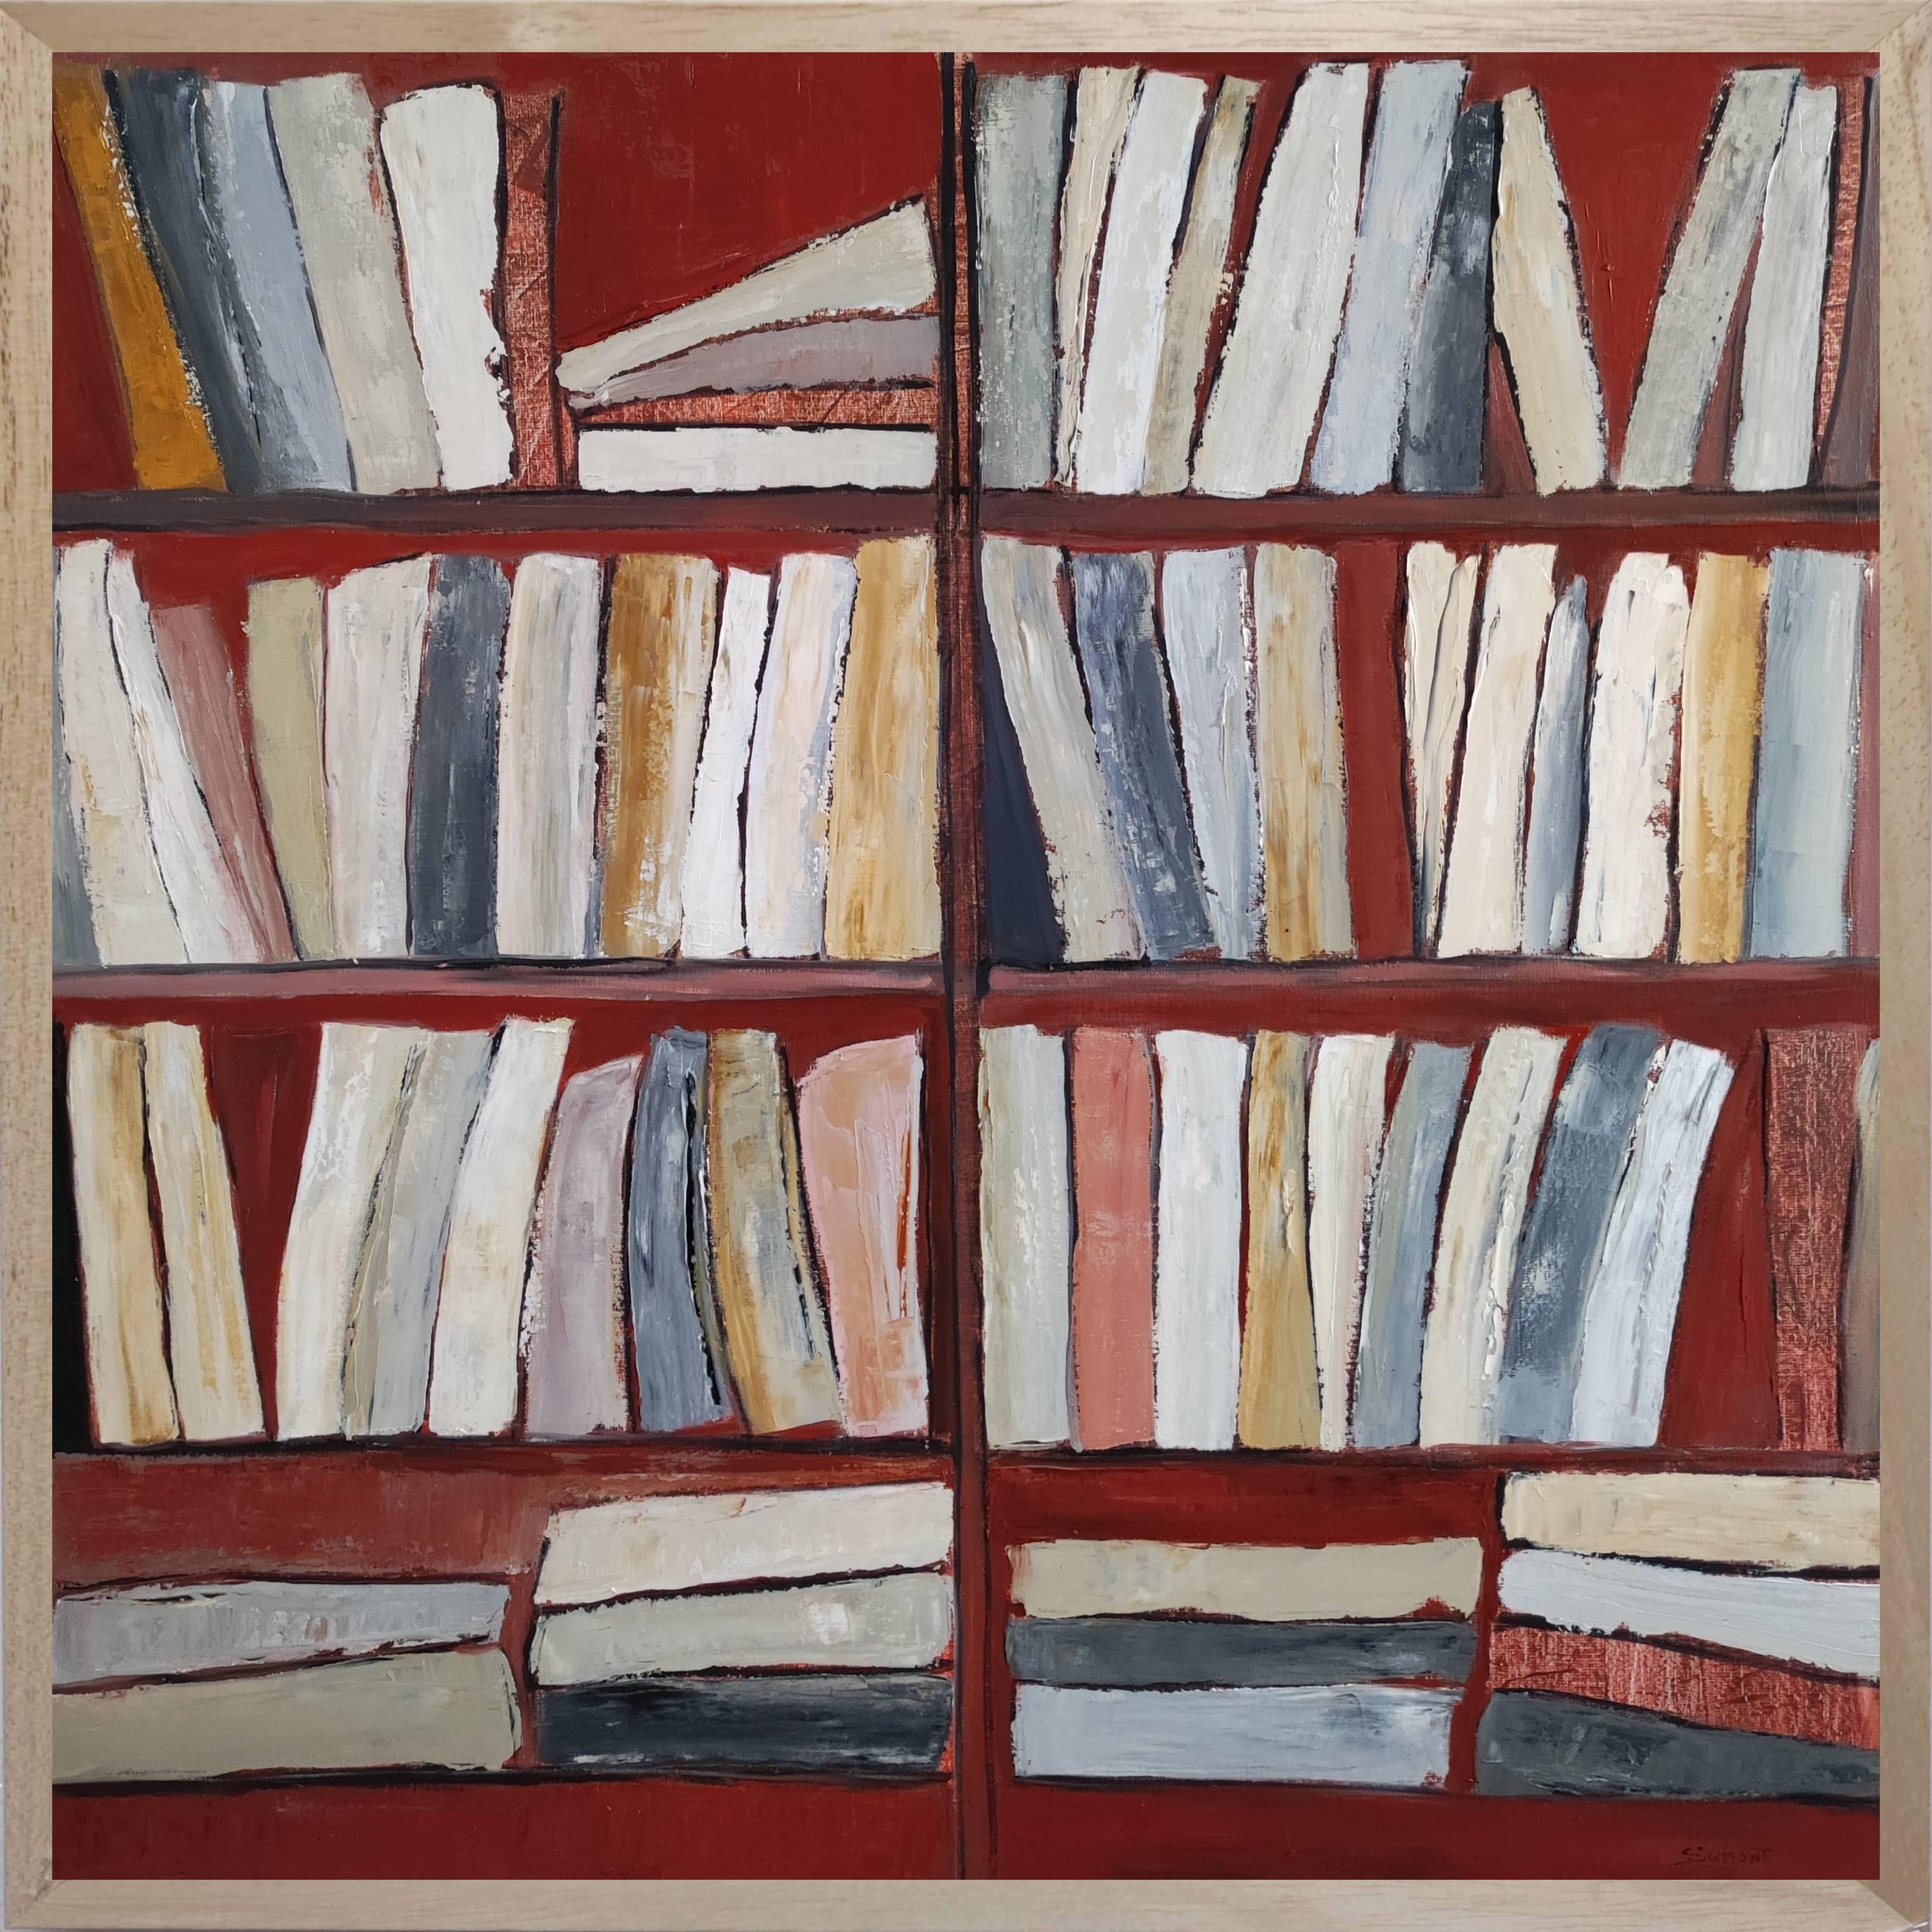 Tecke, abstract, minimalism, library series, oil on canvas, textured, books, red